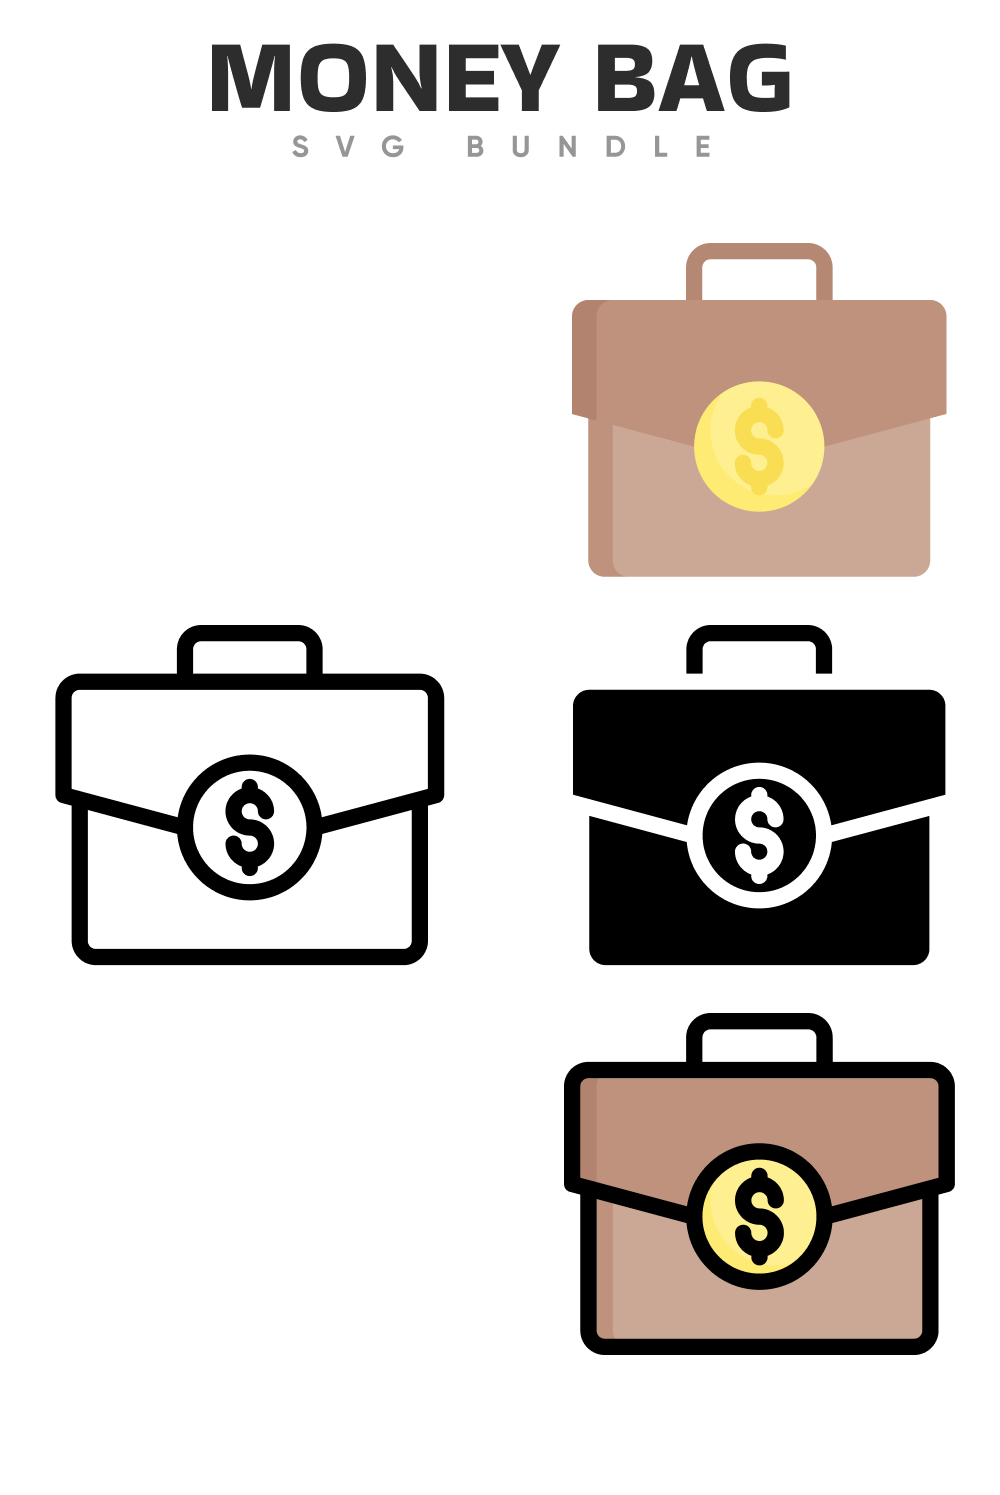 Diverse of money bags in different style.